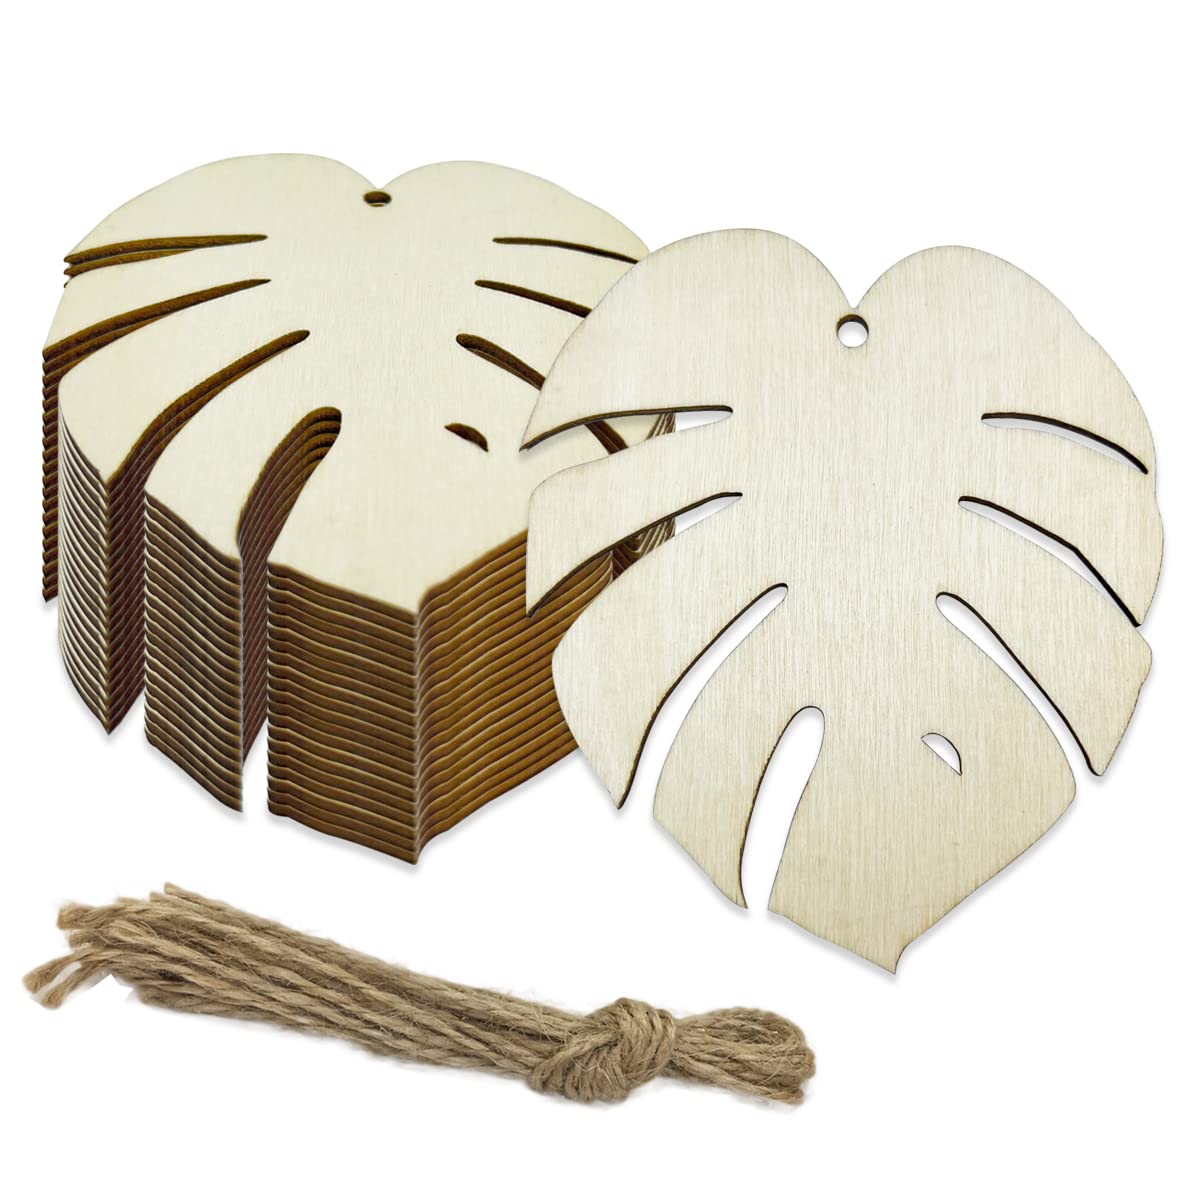 20pcs Unfinished Plam Leaf Wood Cut Out Turtle Leaf Wood DIY Crafts Cutouts Blank Wooden Turtle Leaf Shaped Hanging Ornaments with Hole Hemp Ropes